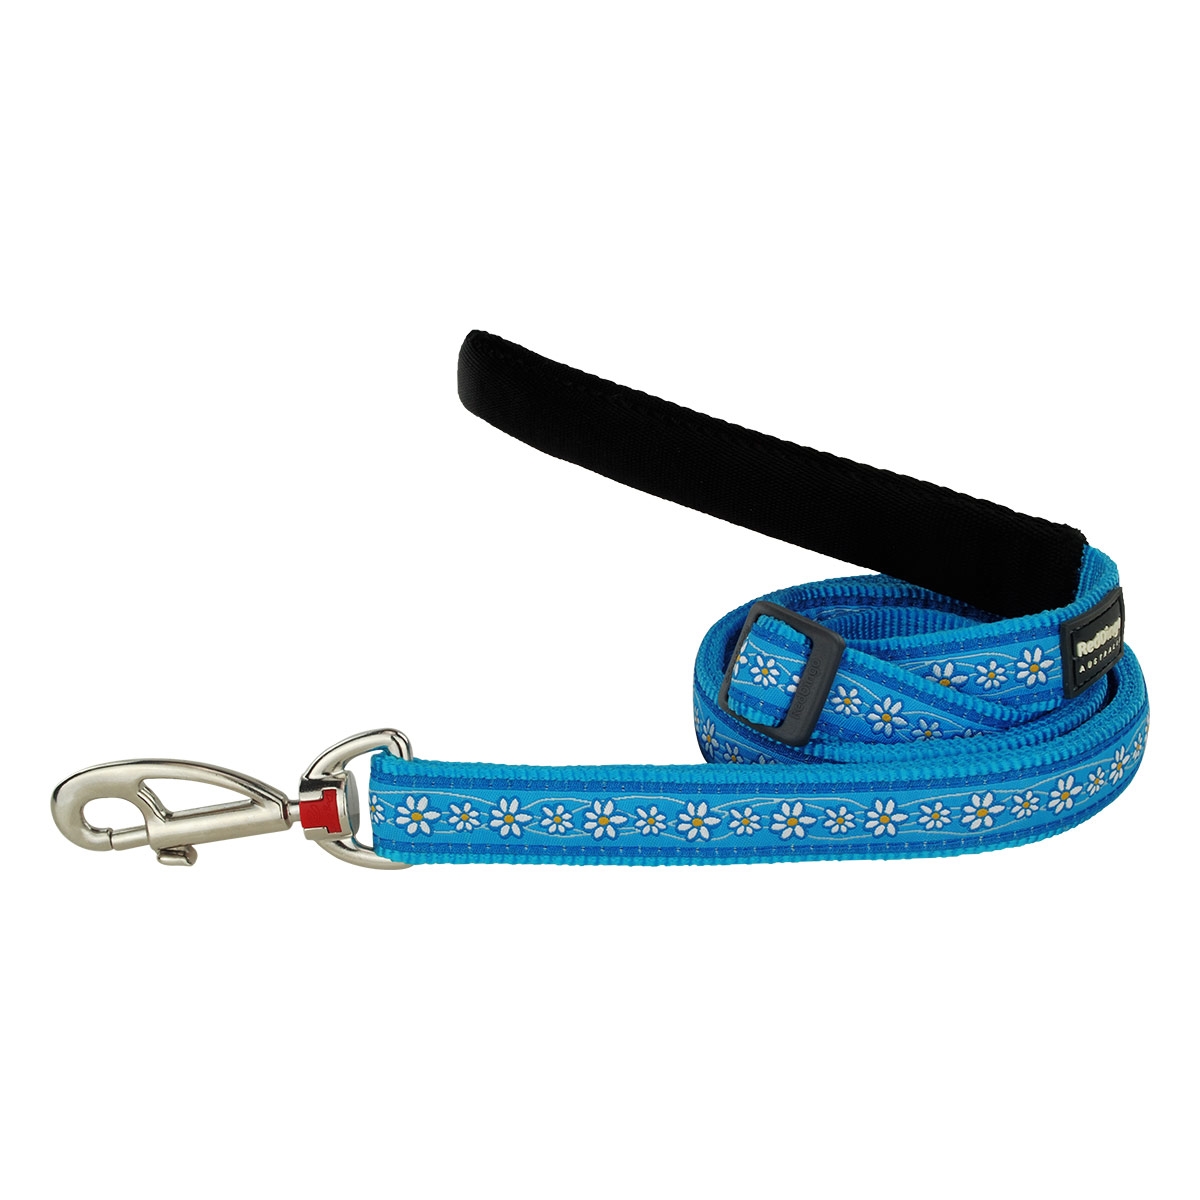 Picture of Red Dingo L6-DC-TQ-20 Daisy Chain Dog Lead Design Turquoise - Medium 6ft